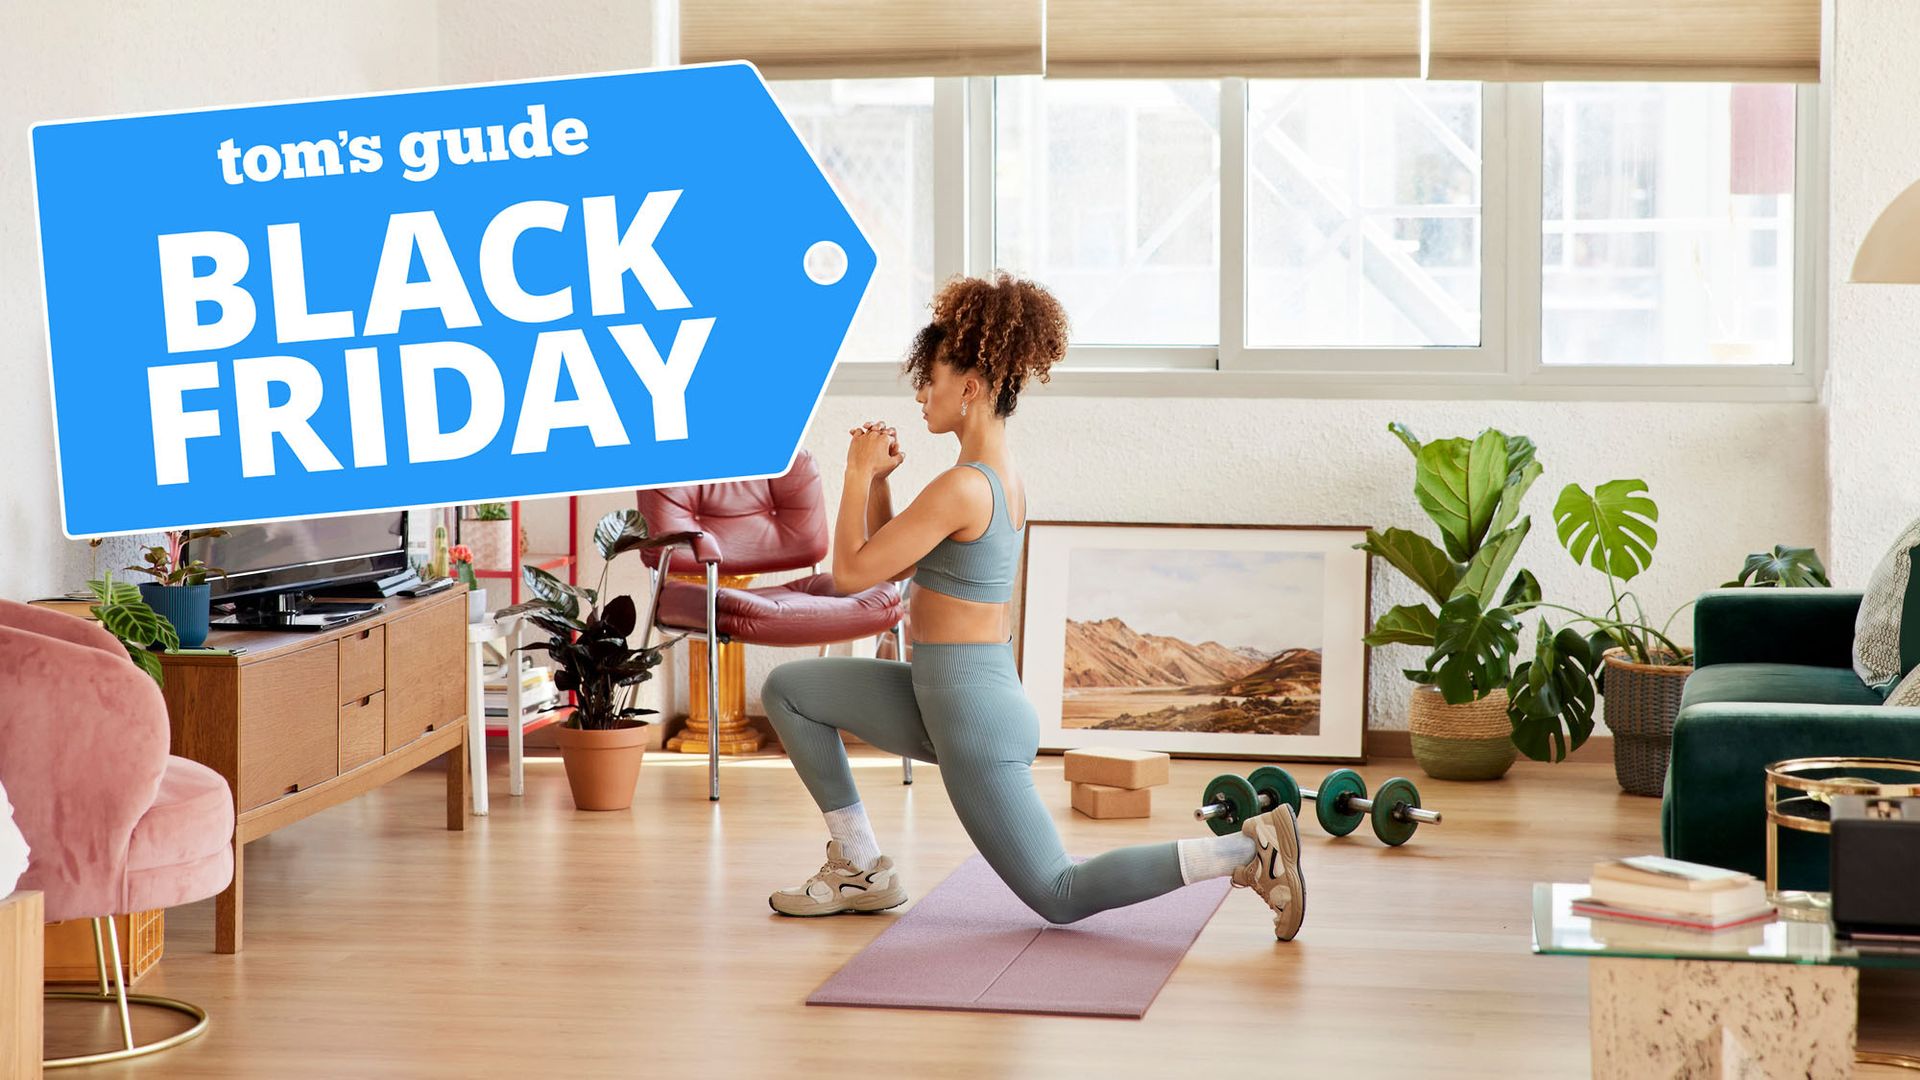 As a personal trainer, these are the best Black Friday fitness deals I